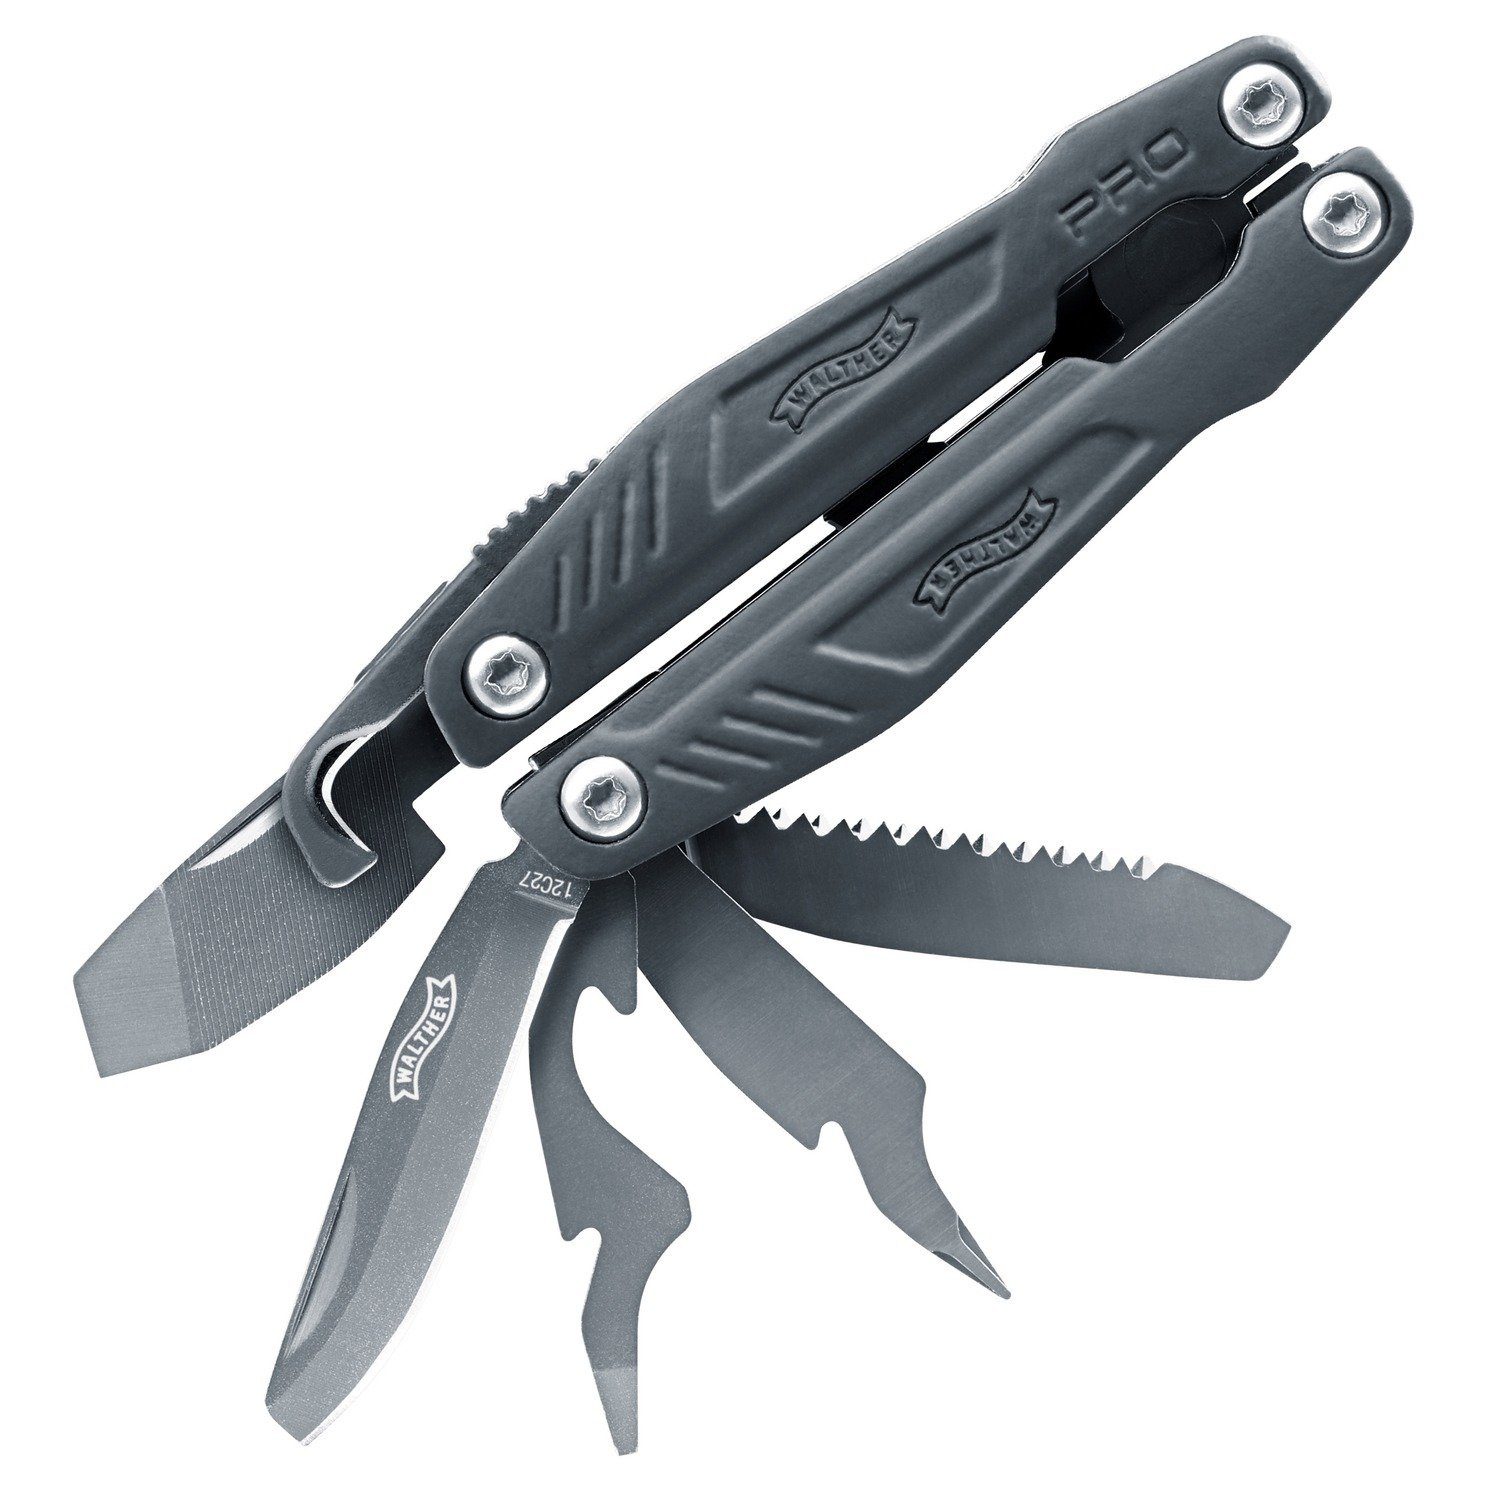 S Pro Multitool Walther Tooltac Multitool